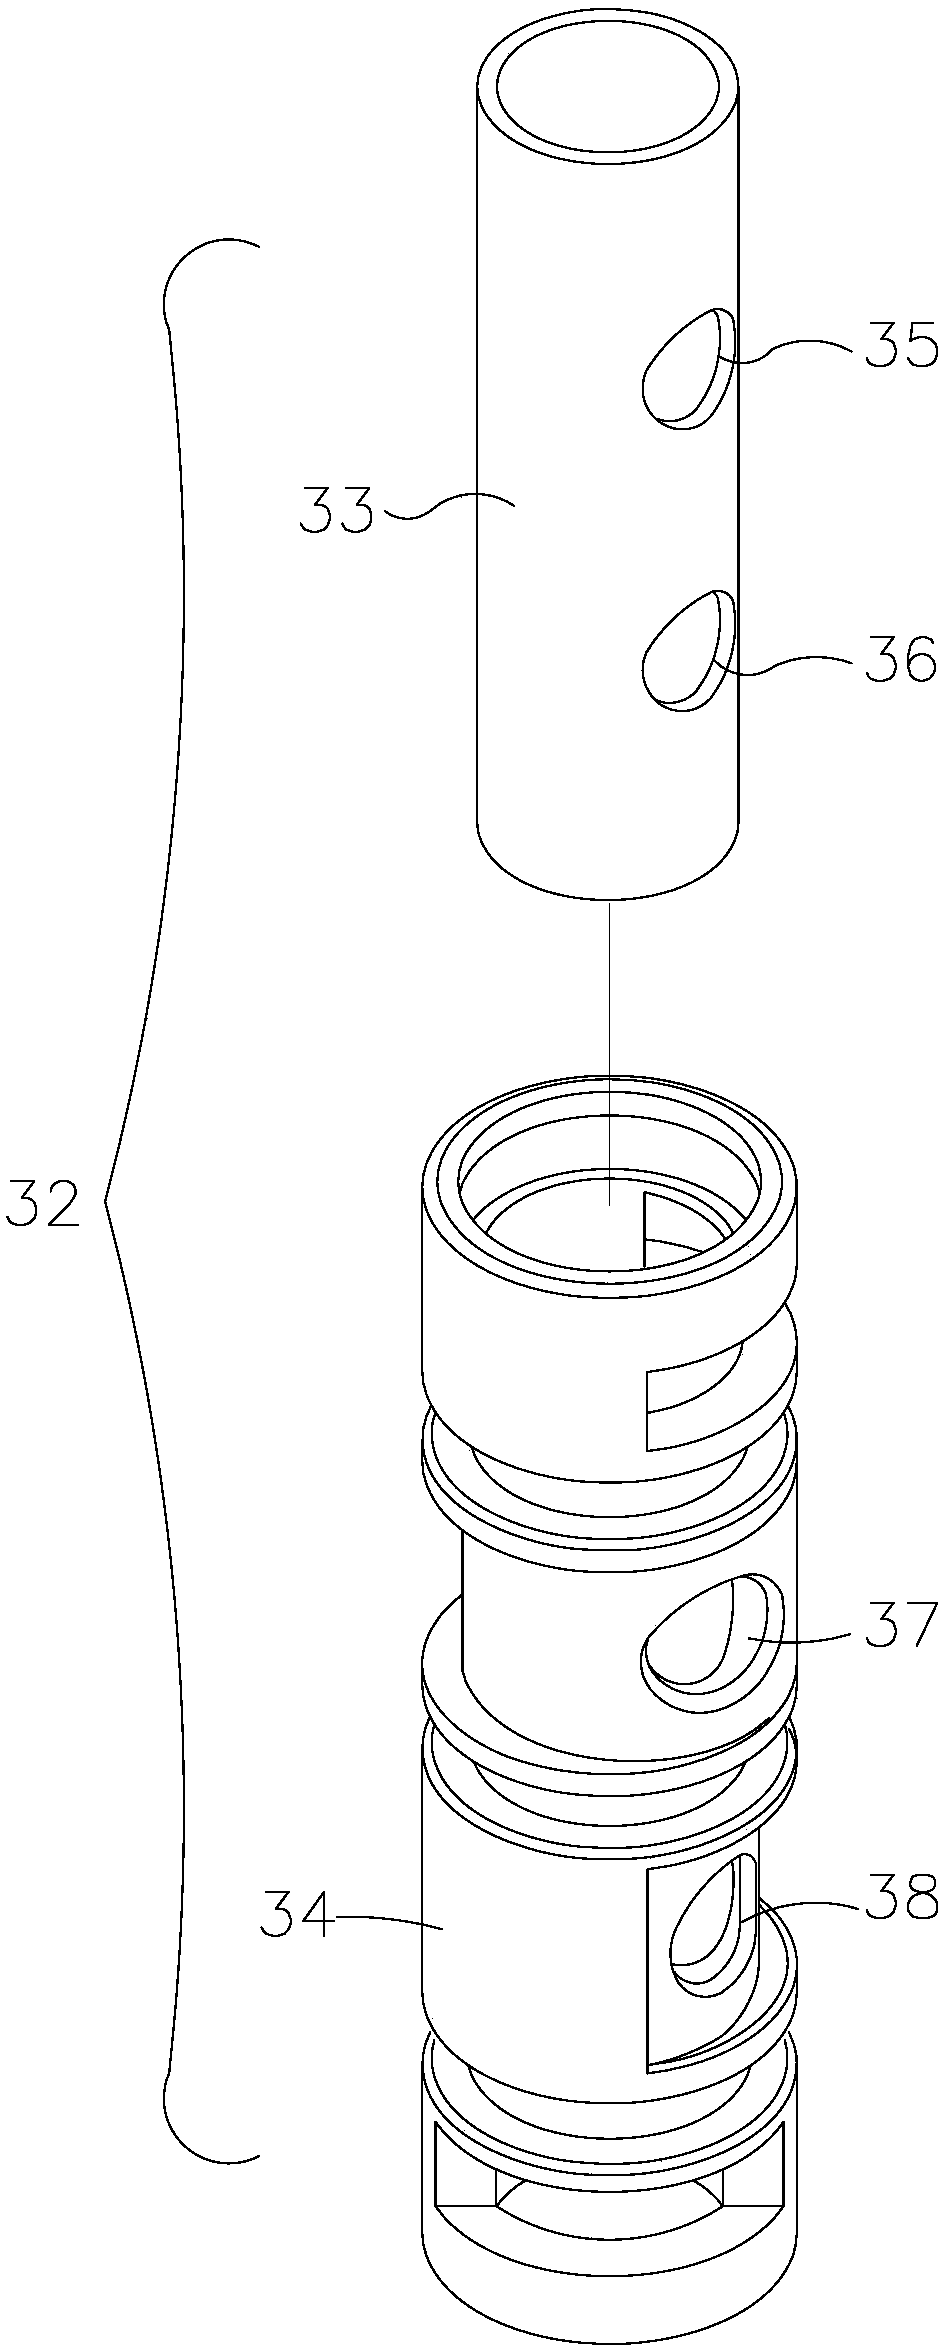 Structural improvement of piston assembly for water hydrant